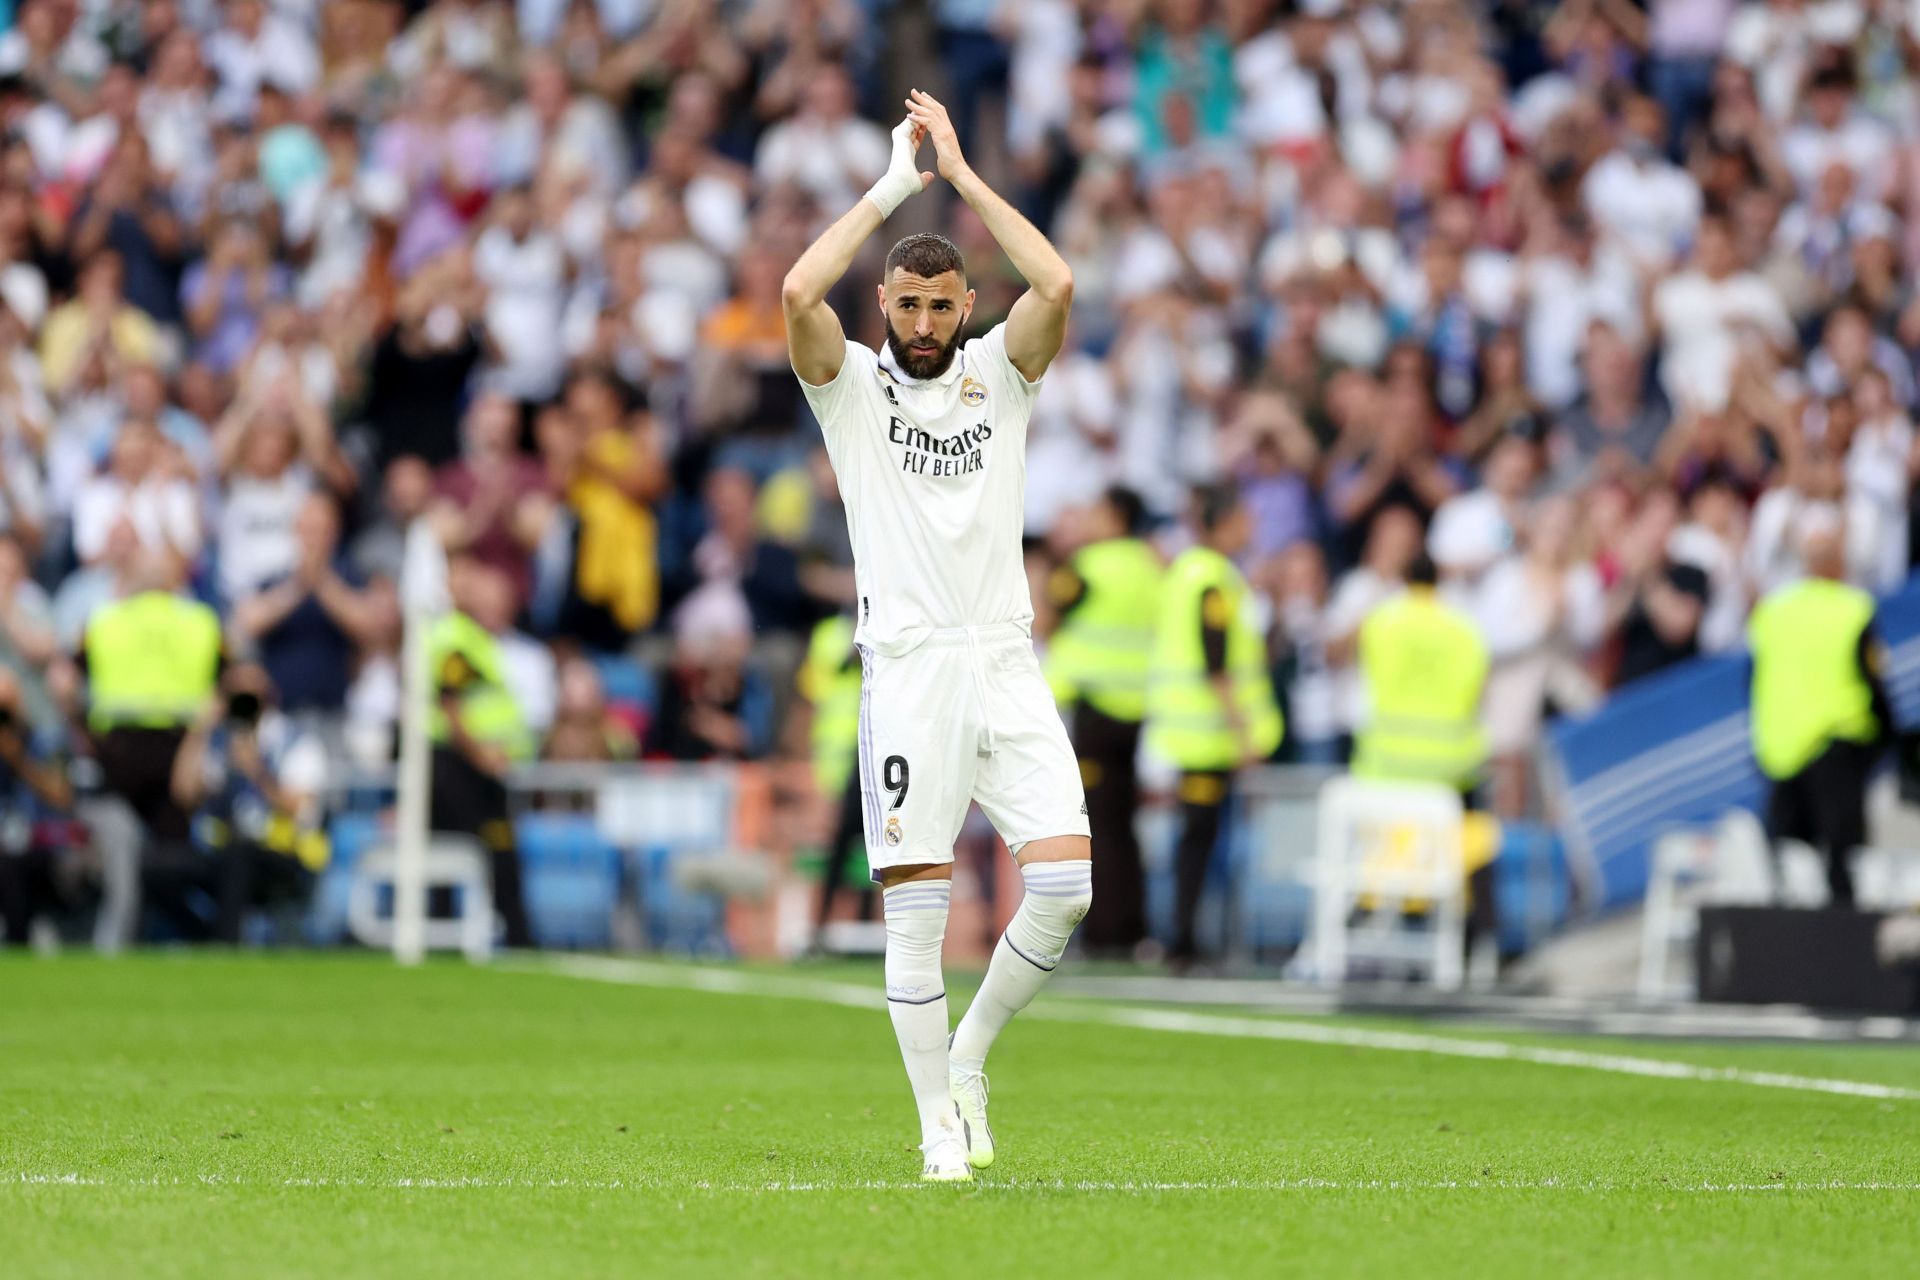 Karim Benzema has decided to leave the Santiago Bernabeu this summer.